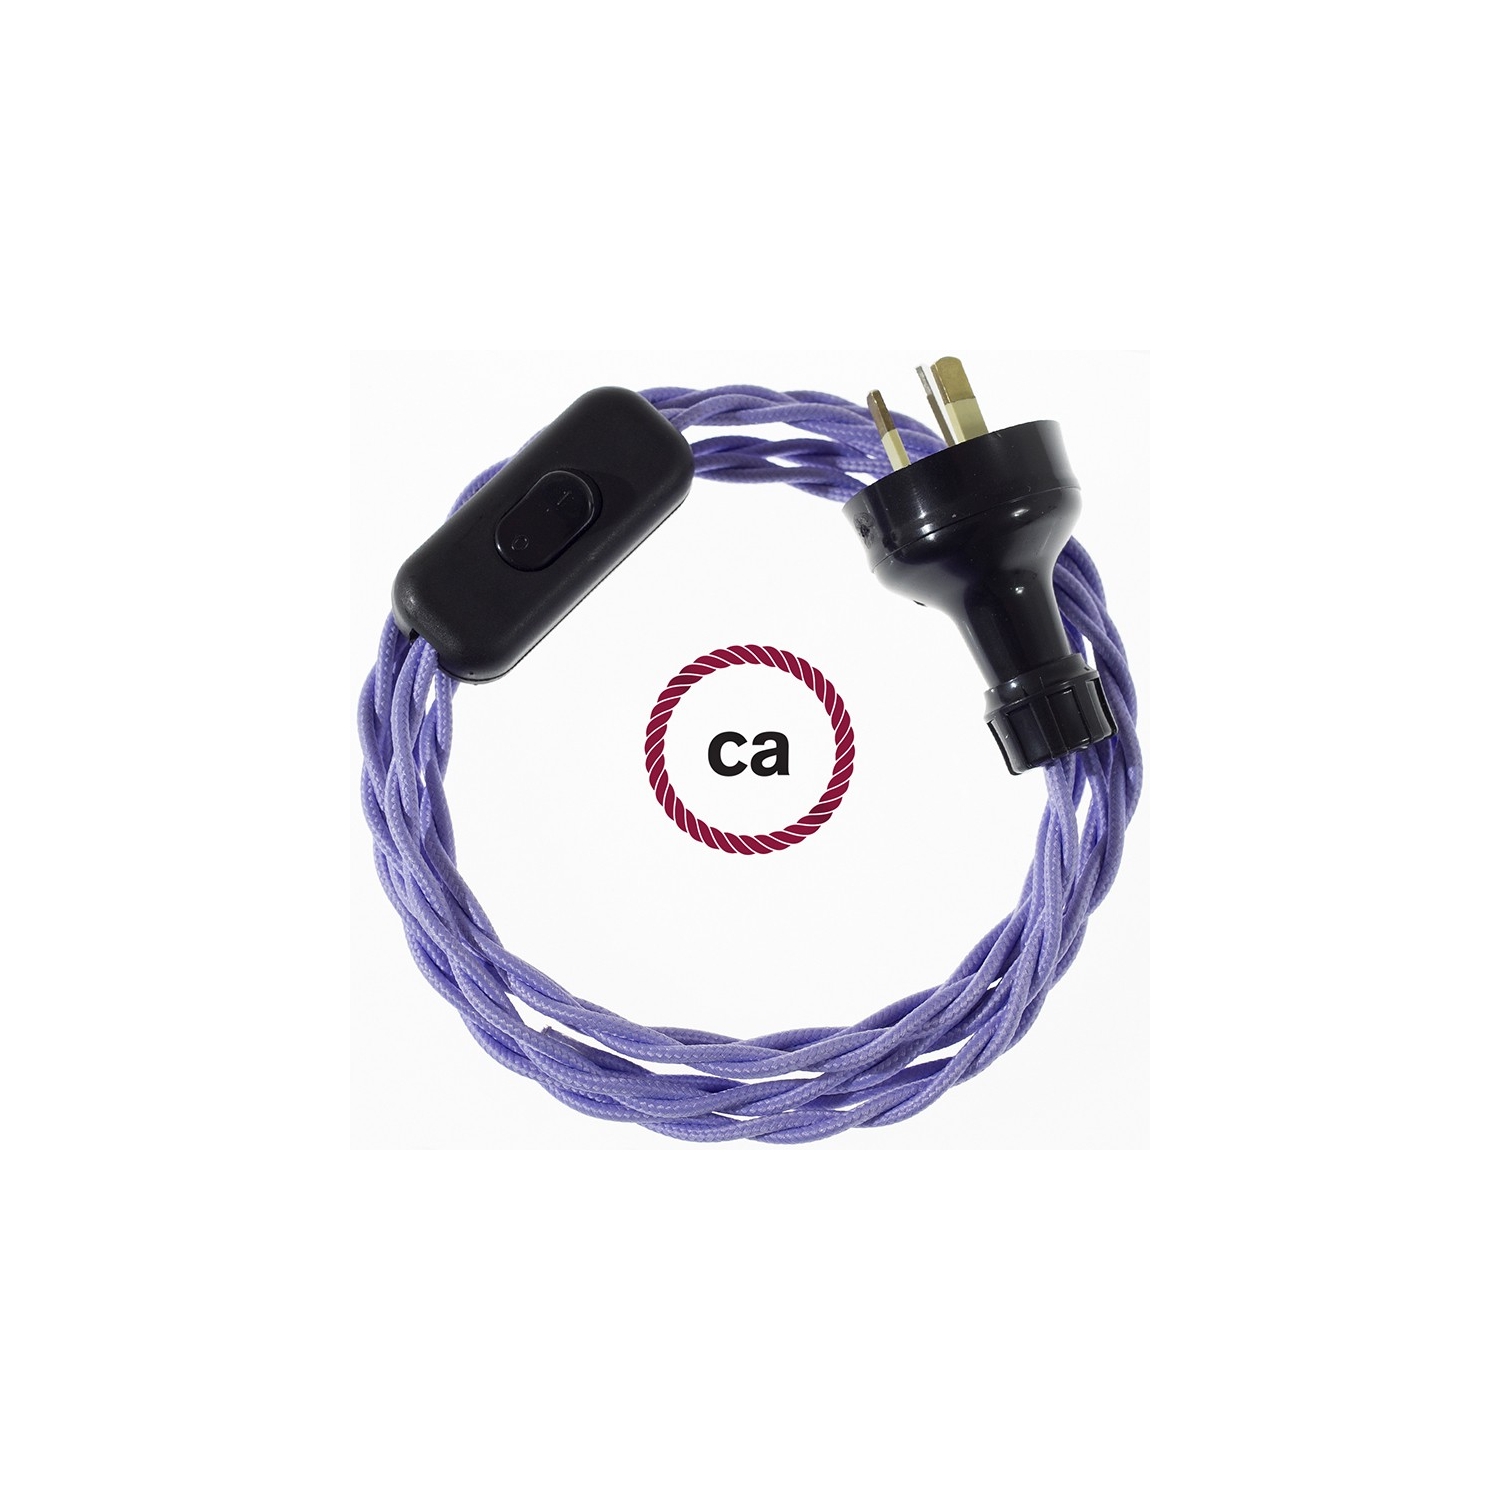 Wiring Lilac Rayon textile cable TM07 - 1.80 mt